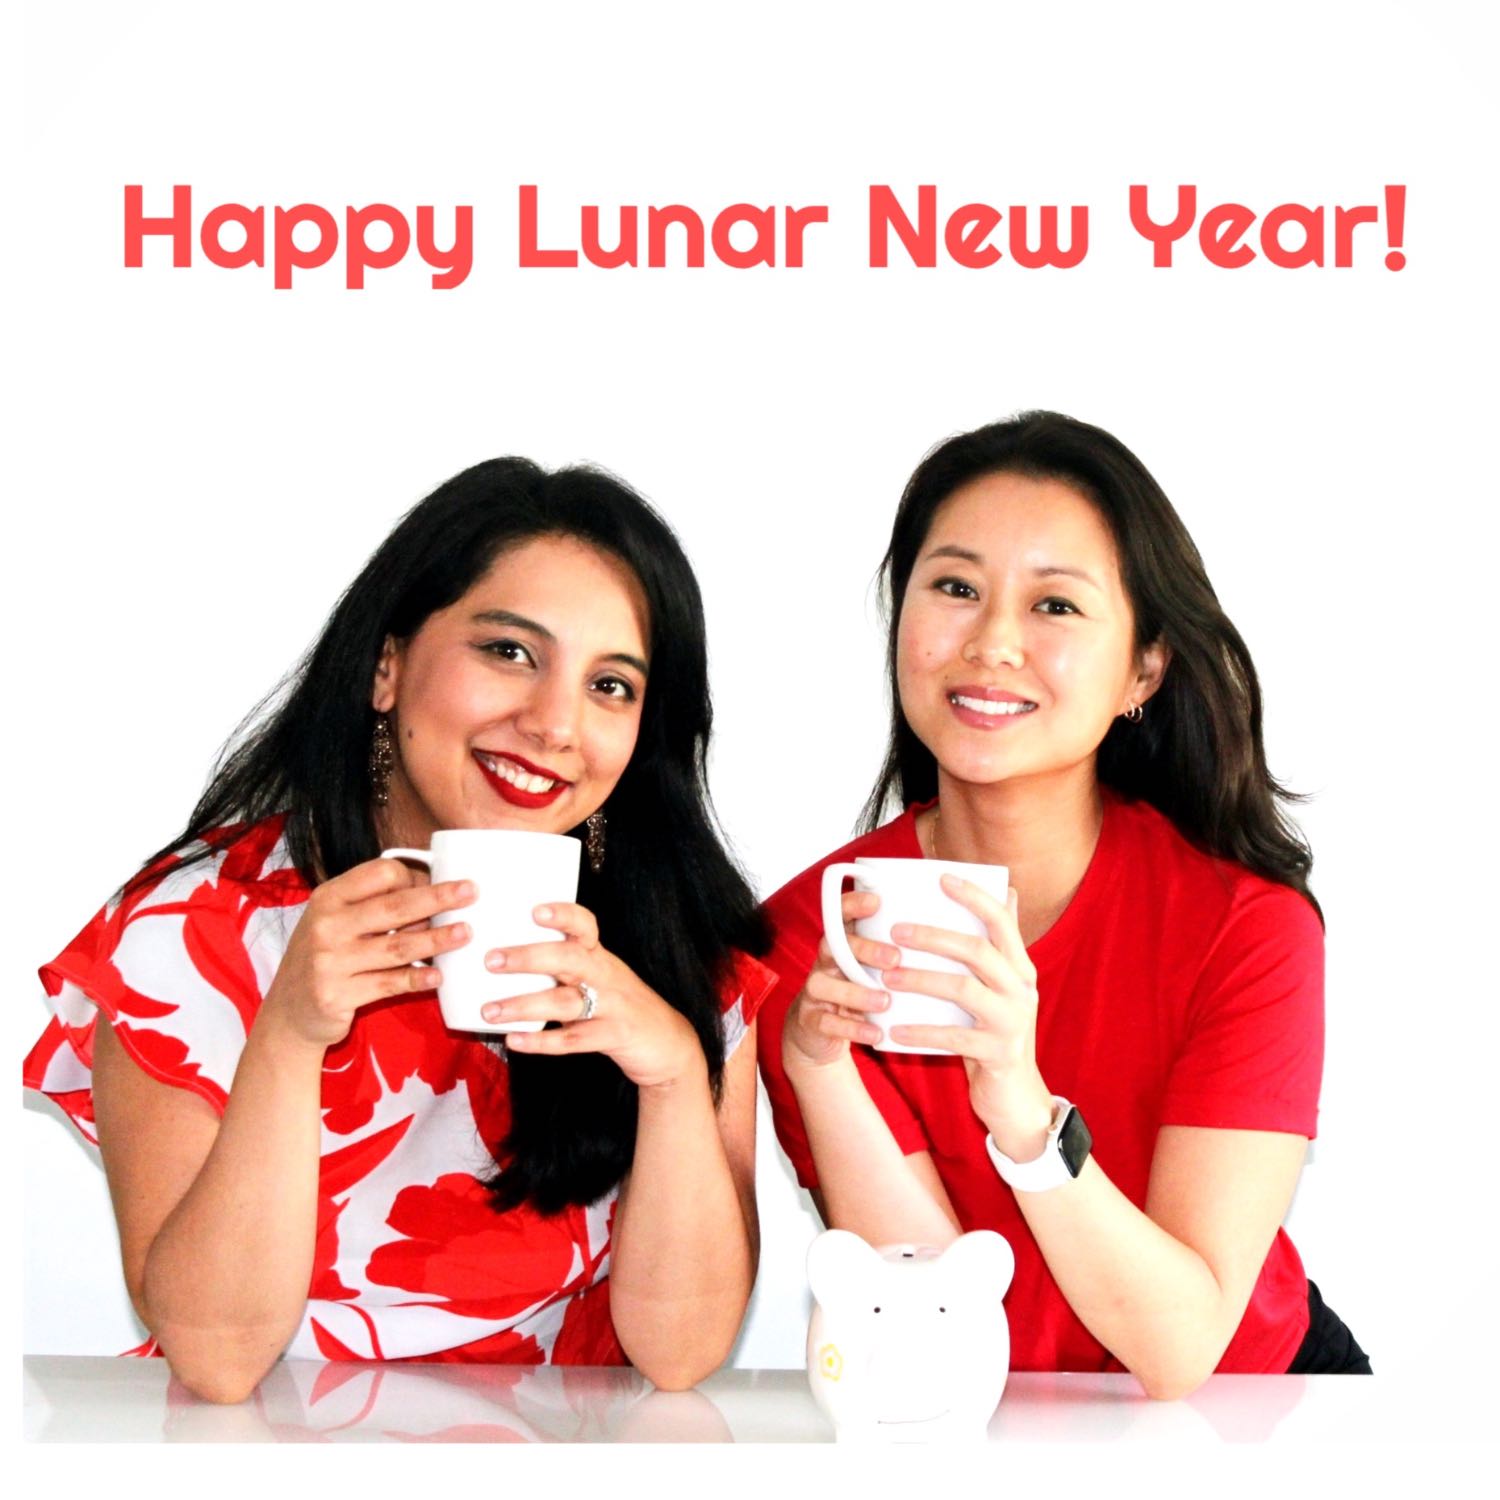 How to attract wealth during the Lunar New Year?